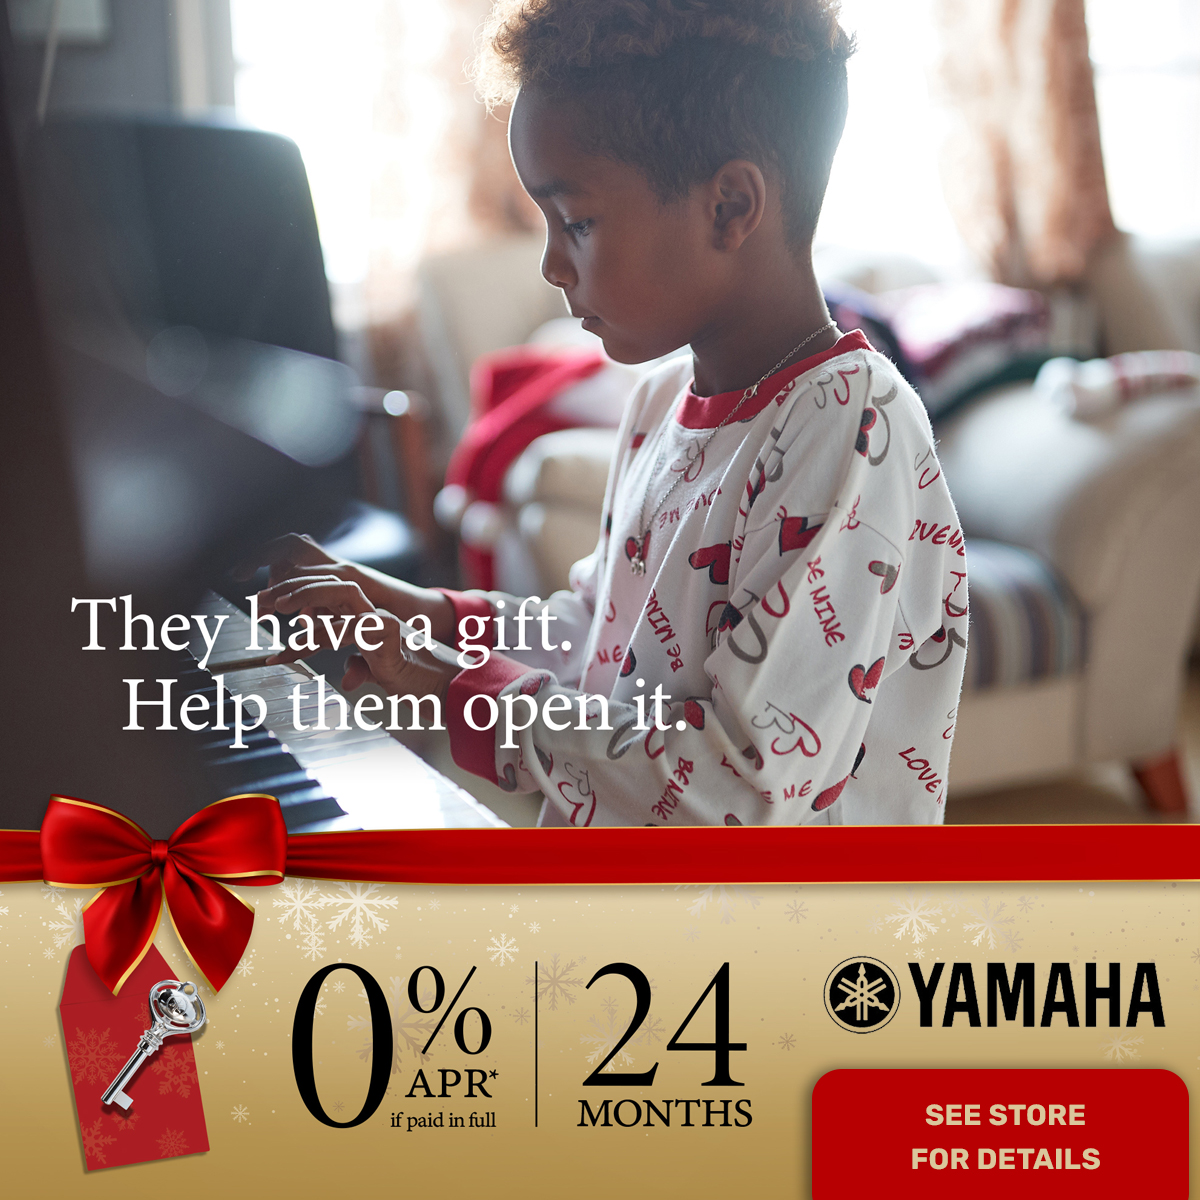 Yamaha 0% APR for 24 Months